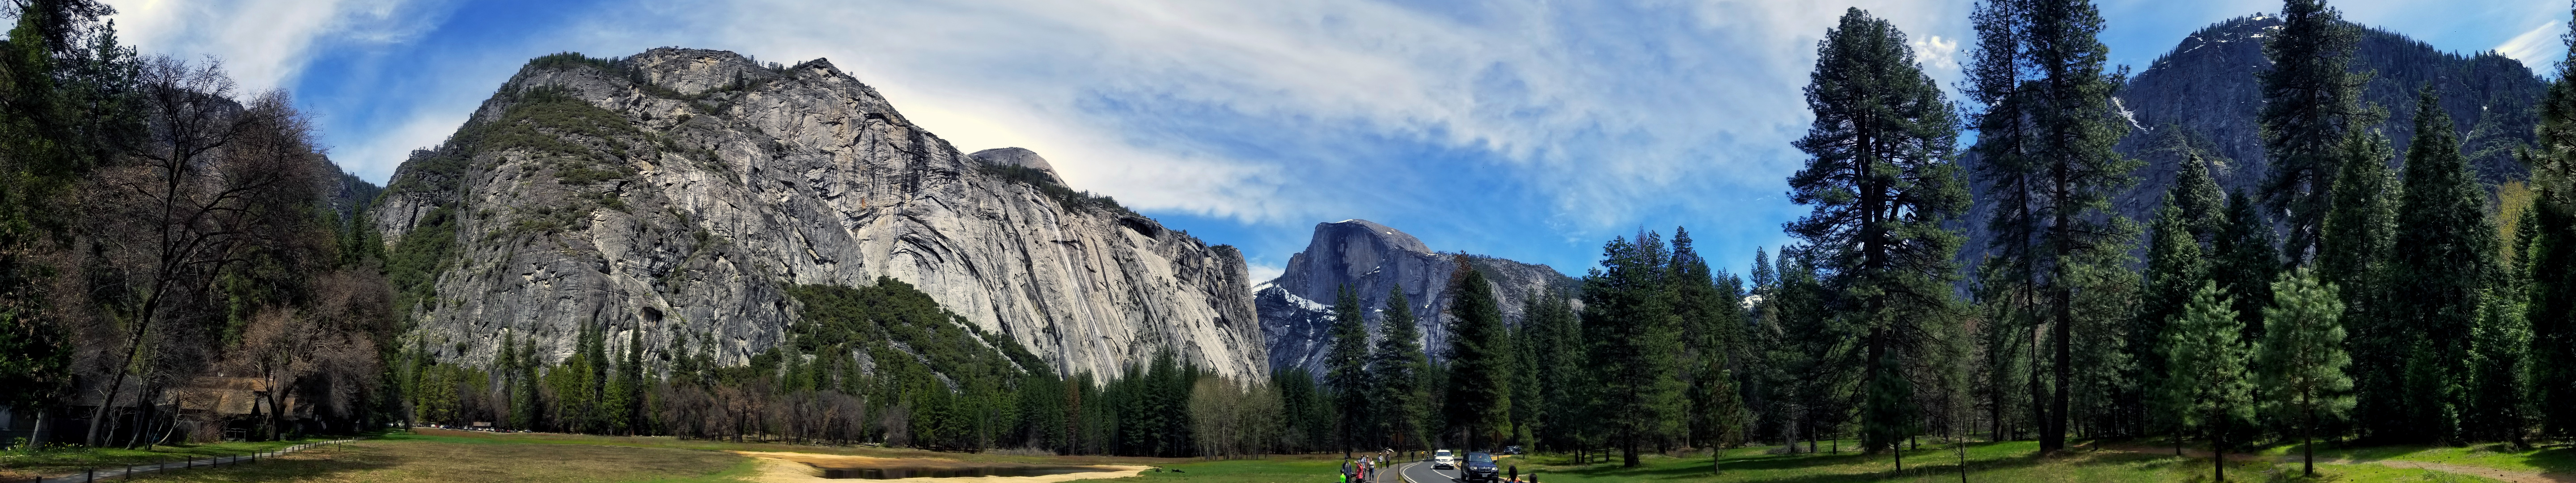 General 5760x1080 panorama triple screen multiple display nature photography Yosemite Valley Yosemite National Park Half Dome cliff mountains trees forest USA